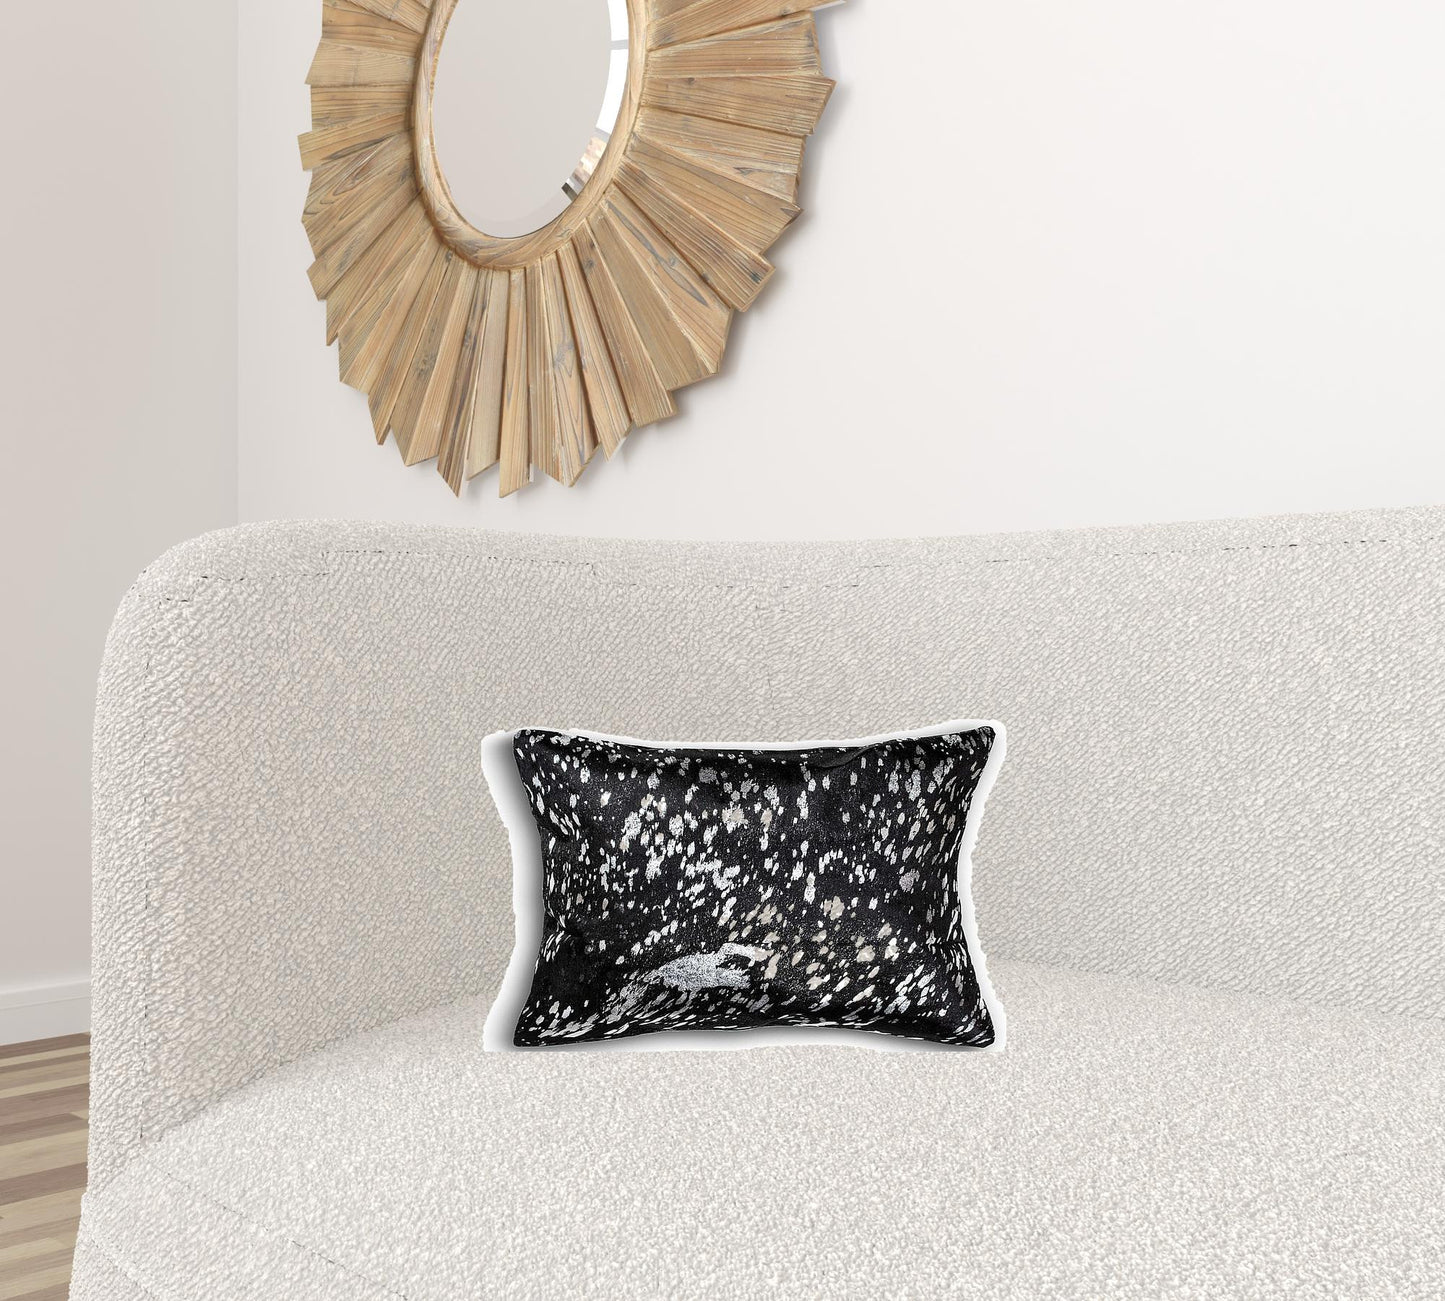 12" X 20" X 5" Black And Silver Cowhide  Pillow